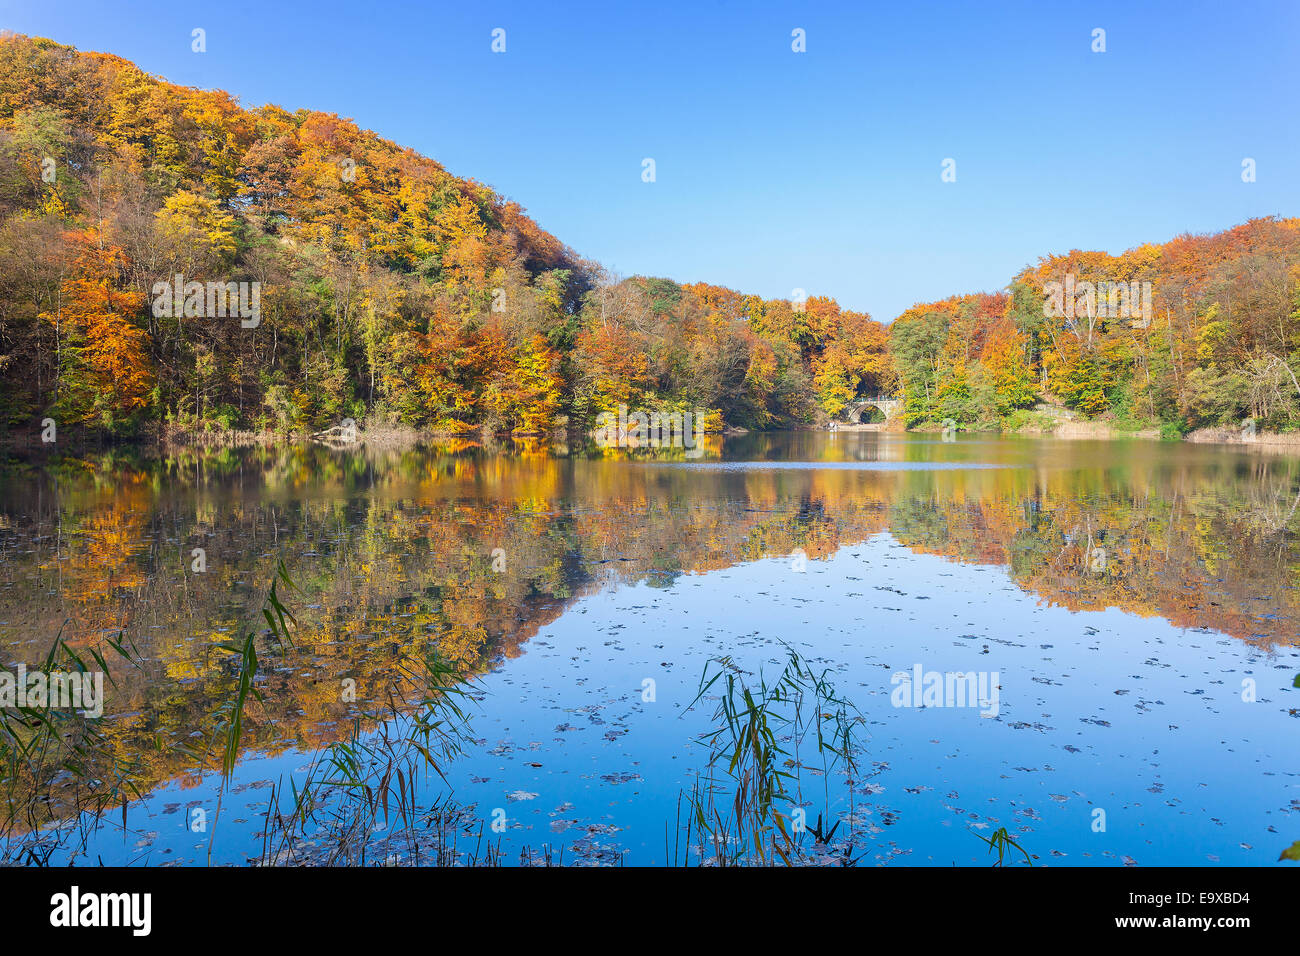 Colorful autumn landscape with reflection in a lake. Stock Photo